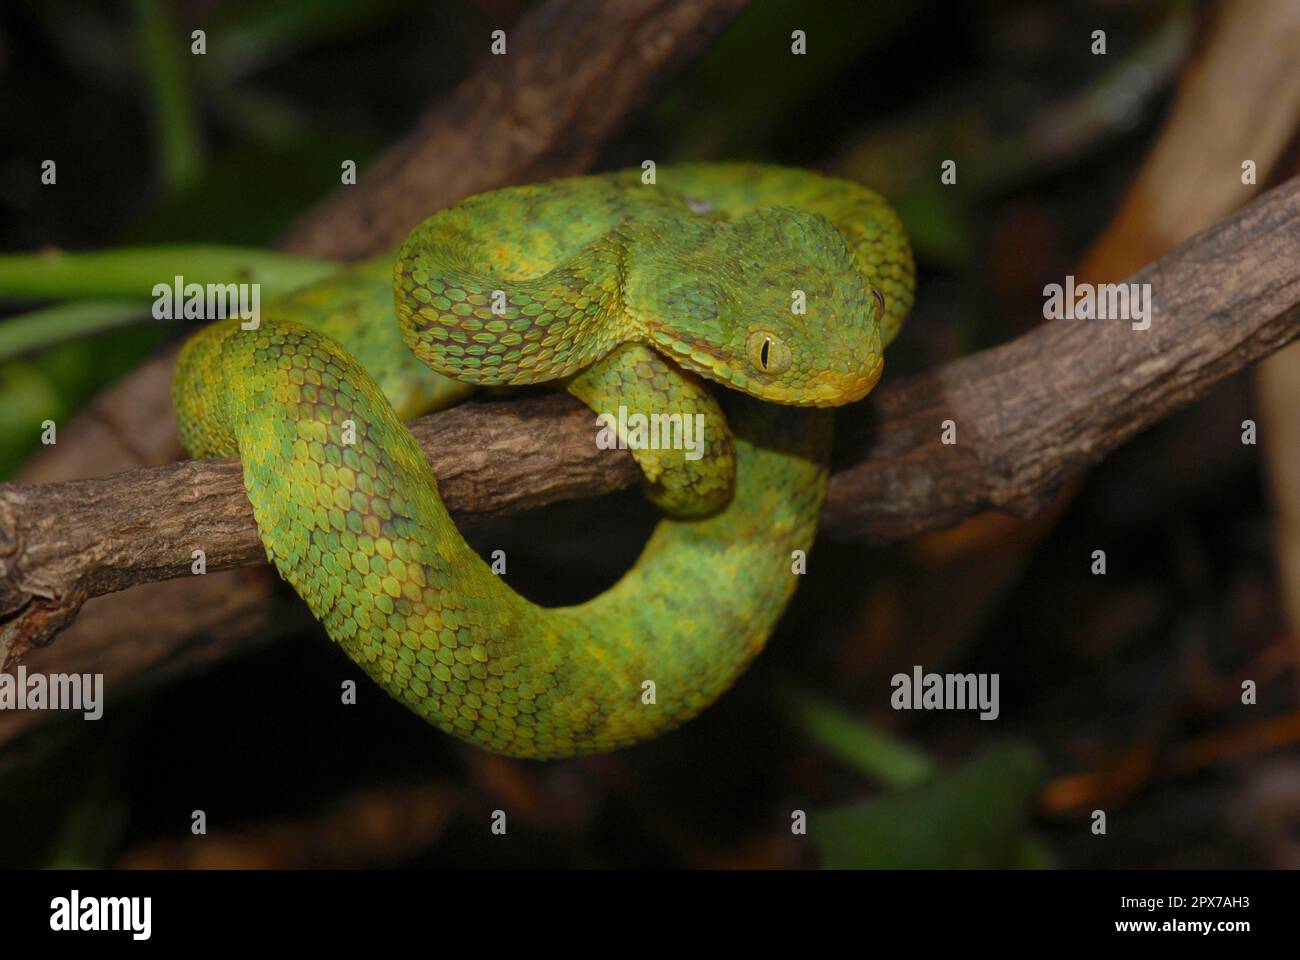 Atheris chlorechis from Mt. Nimba (Photo: C. Brede).